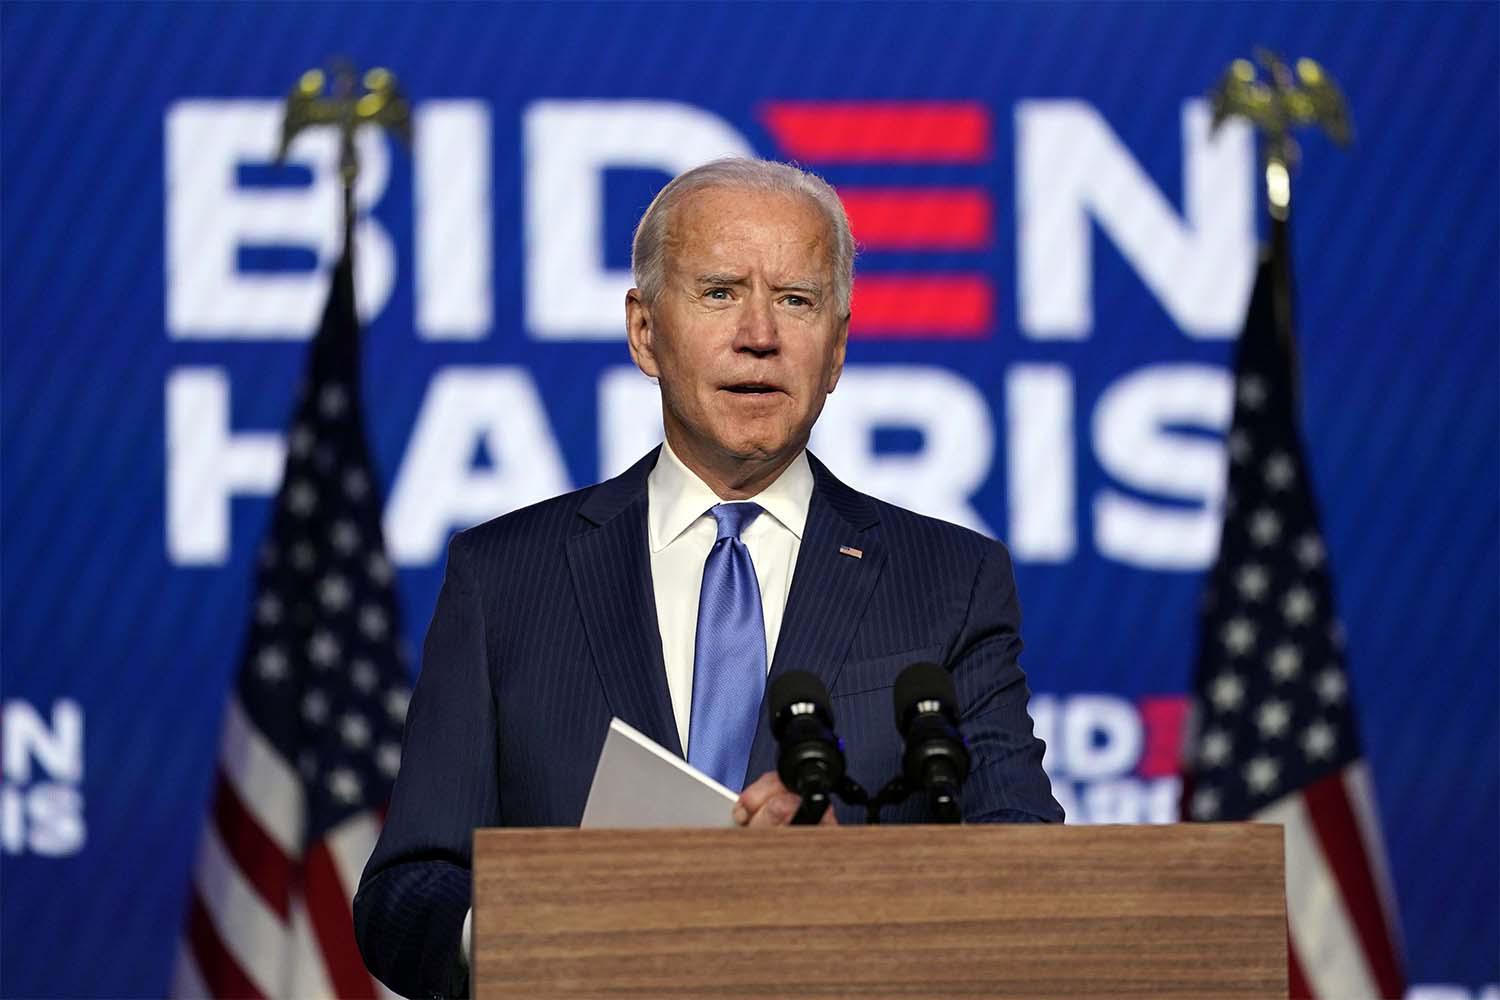 Joe Biden is the 46th President of the United States